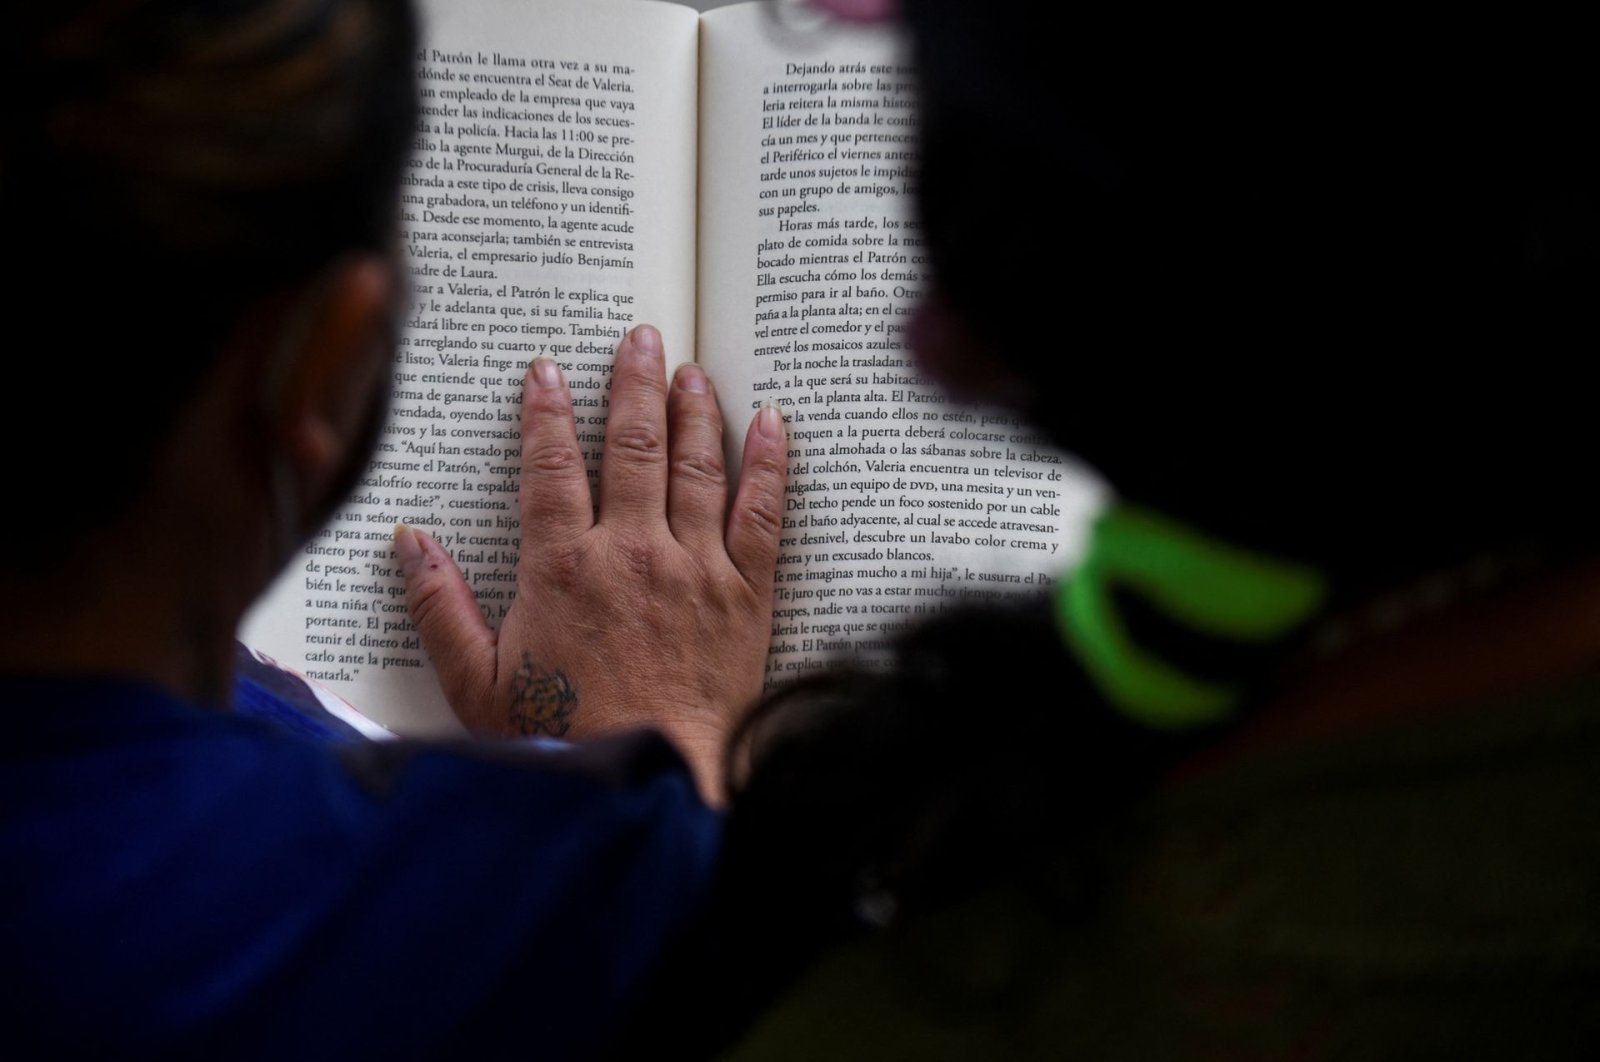 Jaqueline and a fellow inmate read a book in prison where they have access to a small library as part of a program that aims to spread literacy and offer the chance to get out of jail earlier, in La Paz, Bolivia, April 29, 2022. (Reuters Photo)